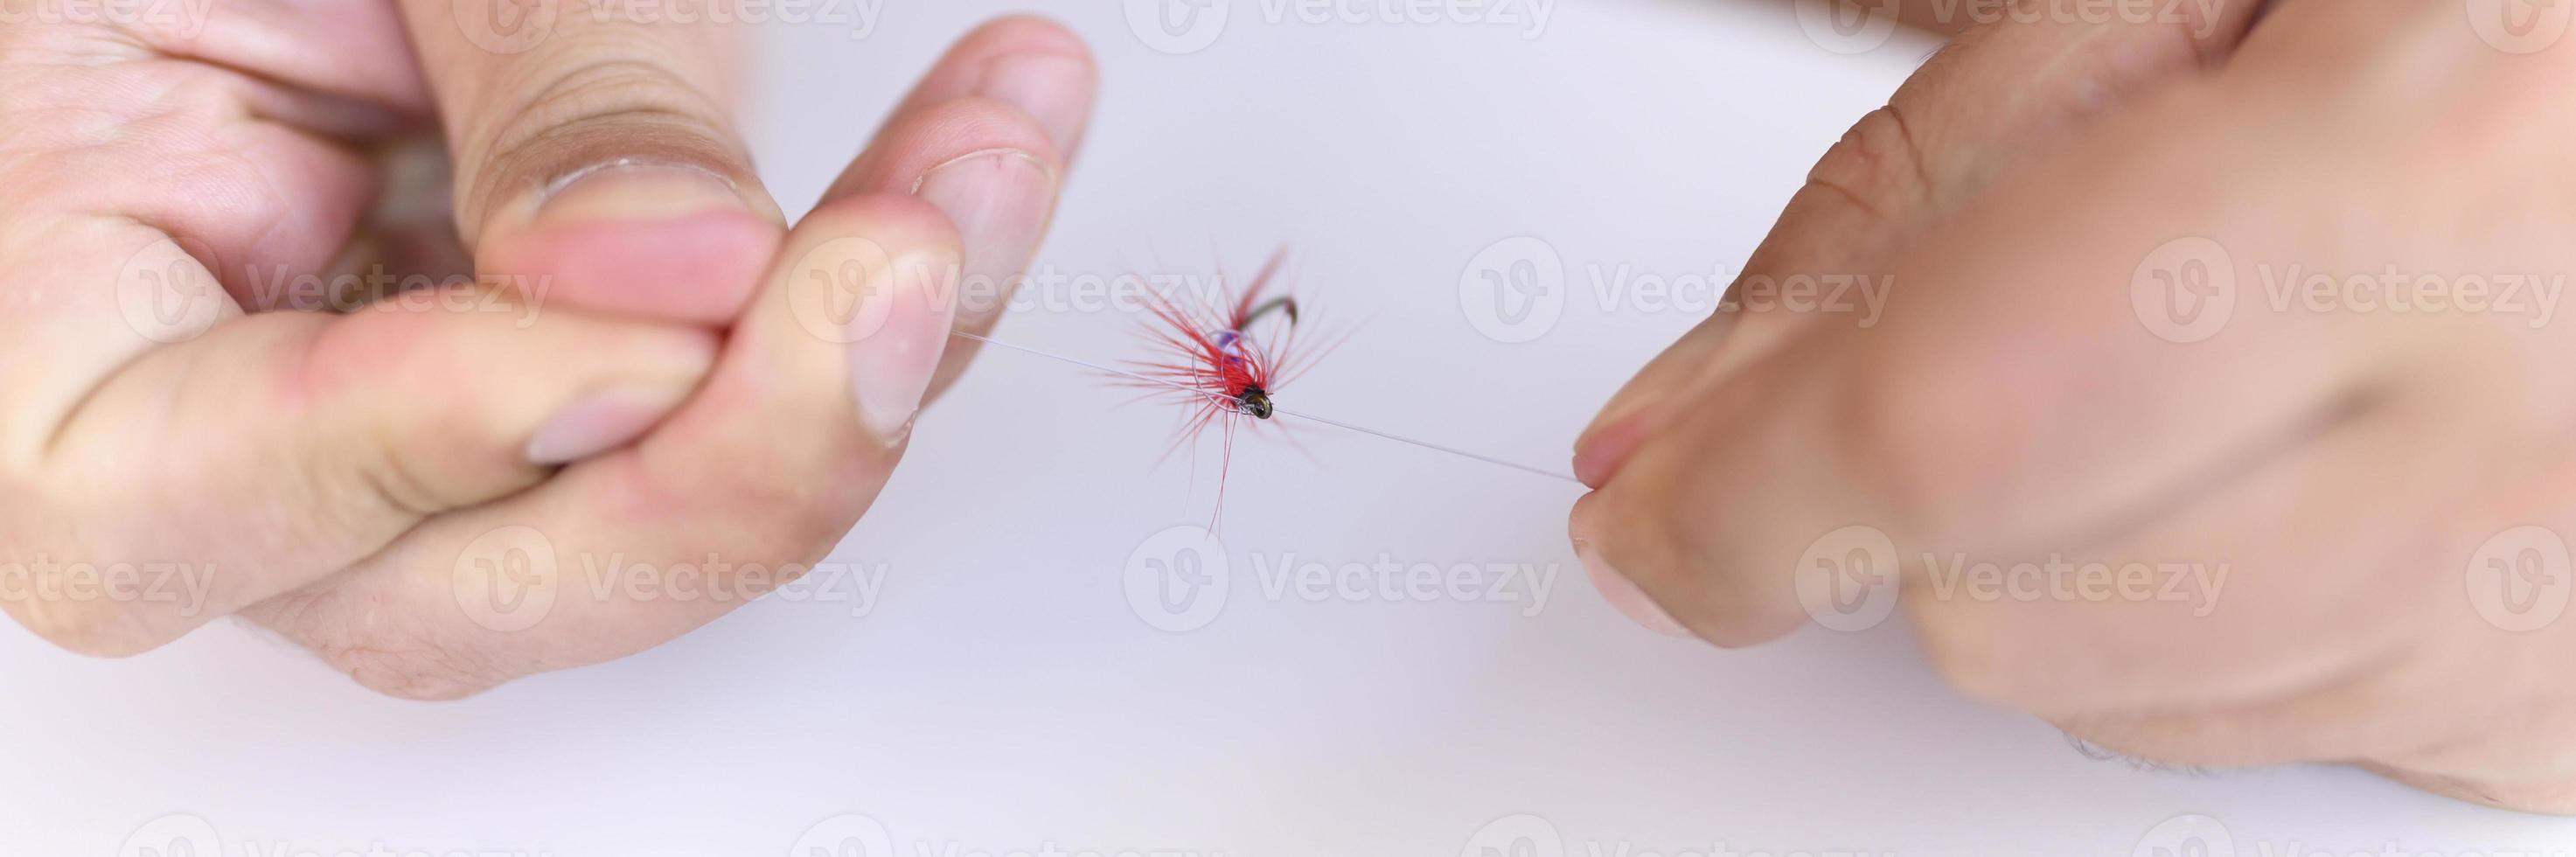 Man's hands tying a fishing line with a fly on a fishing hook photo